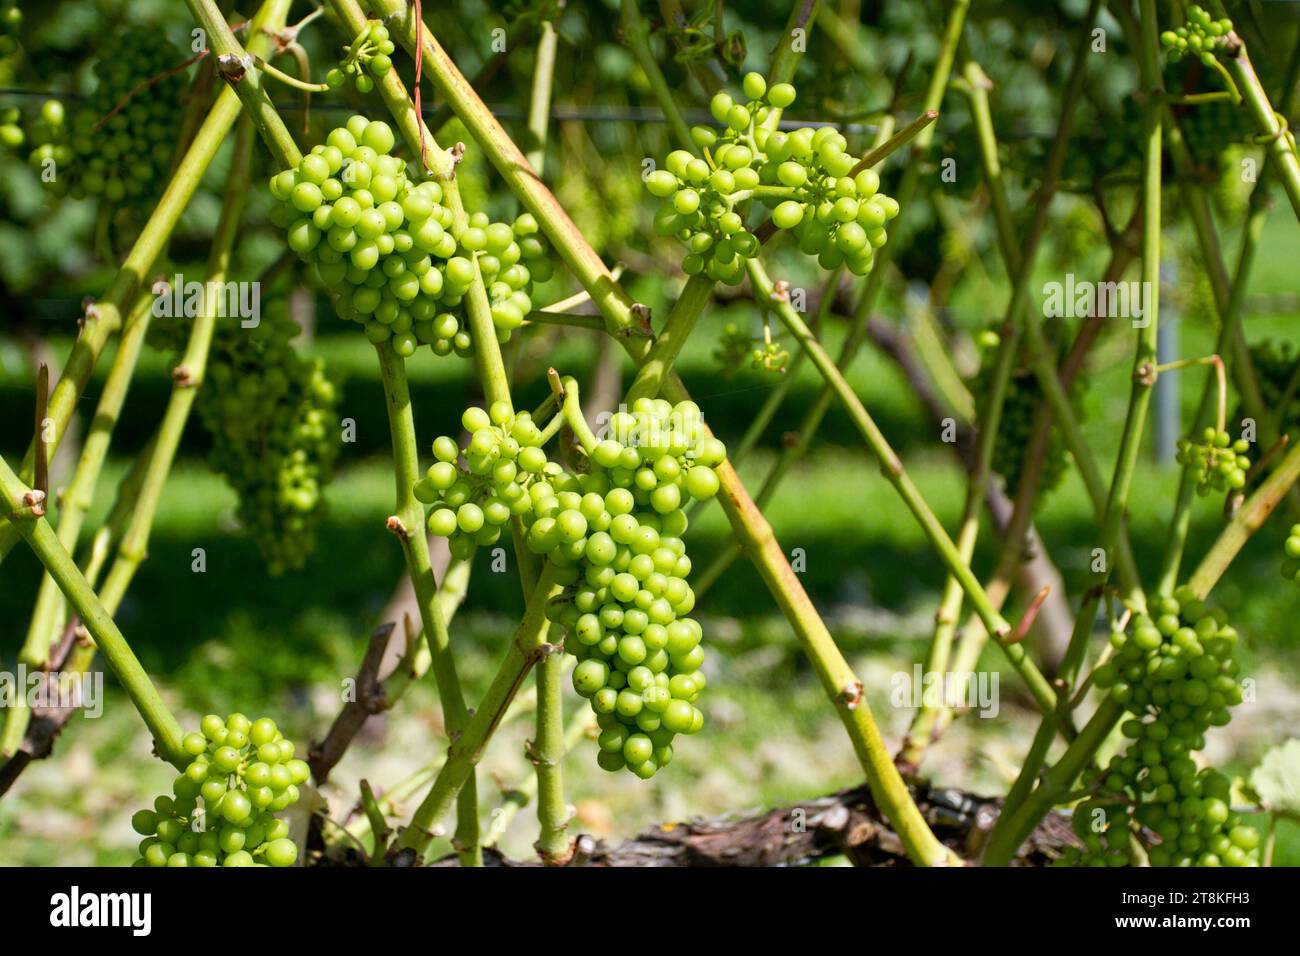 Bunches of green grapes for wine-making on a vine in Somerset, England, GB Stock Photo